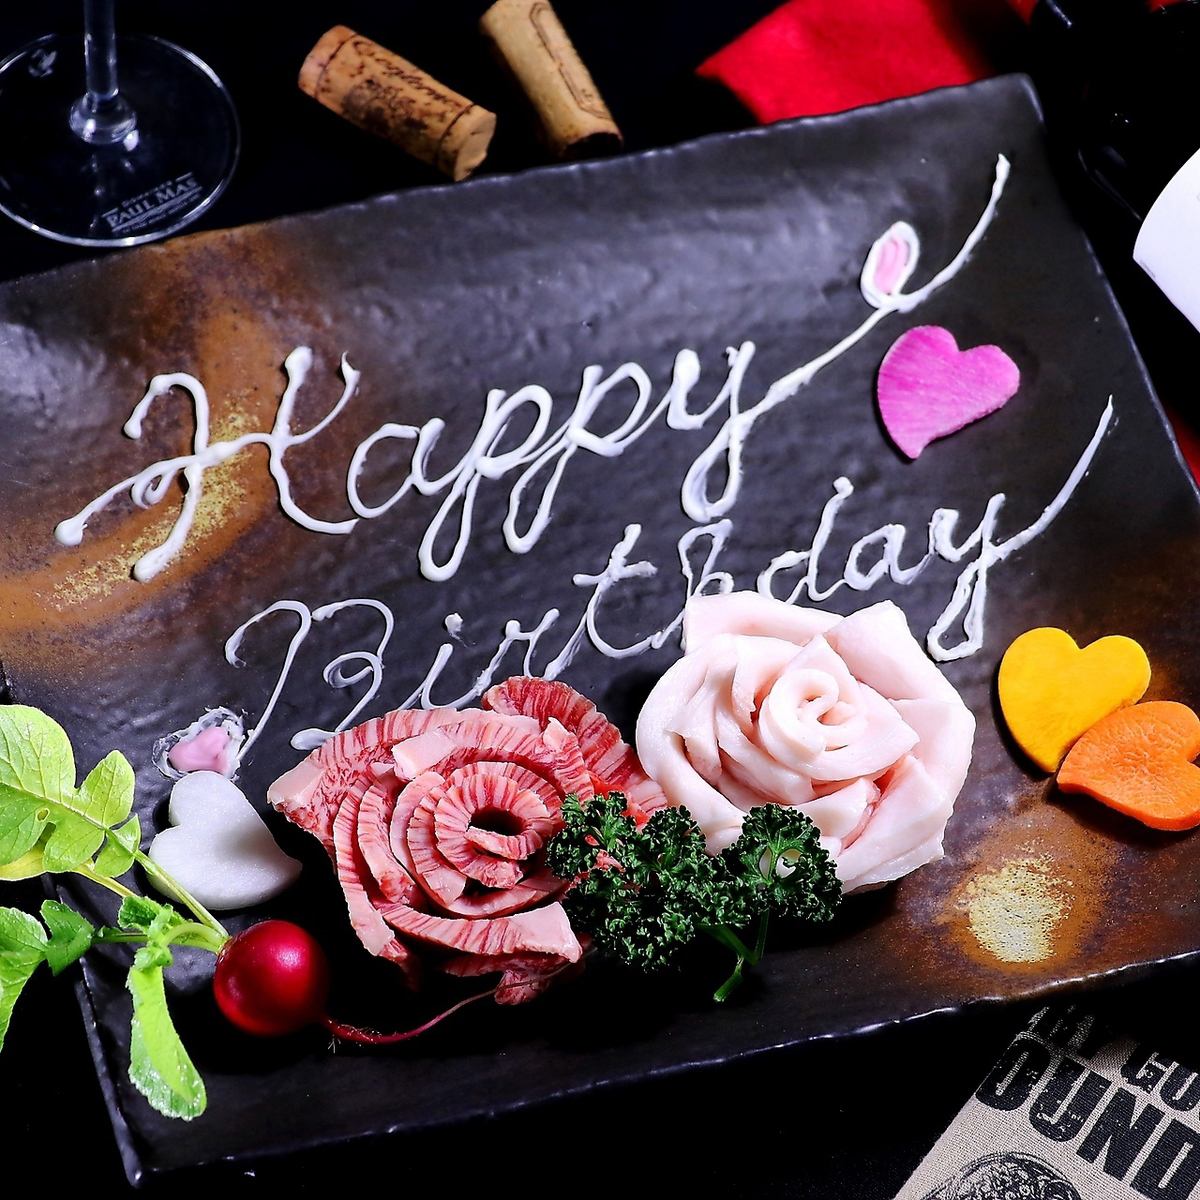 We accept recommended message plates for birthdays and anniversaries ♪